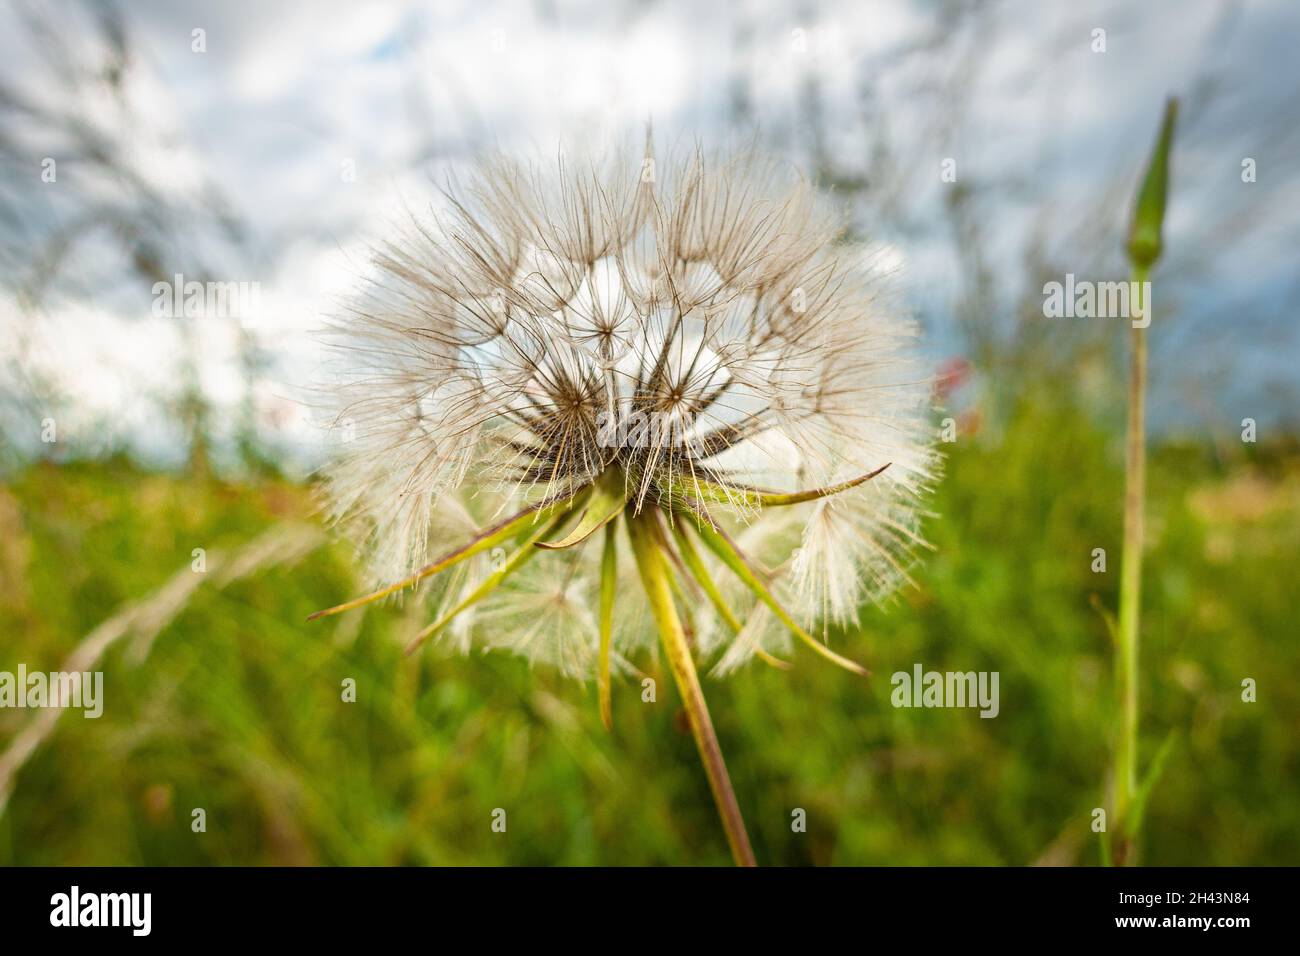 Dandelion seed head against a horizon line with grass and sky Stock Photo